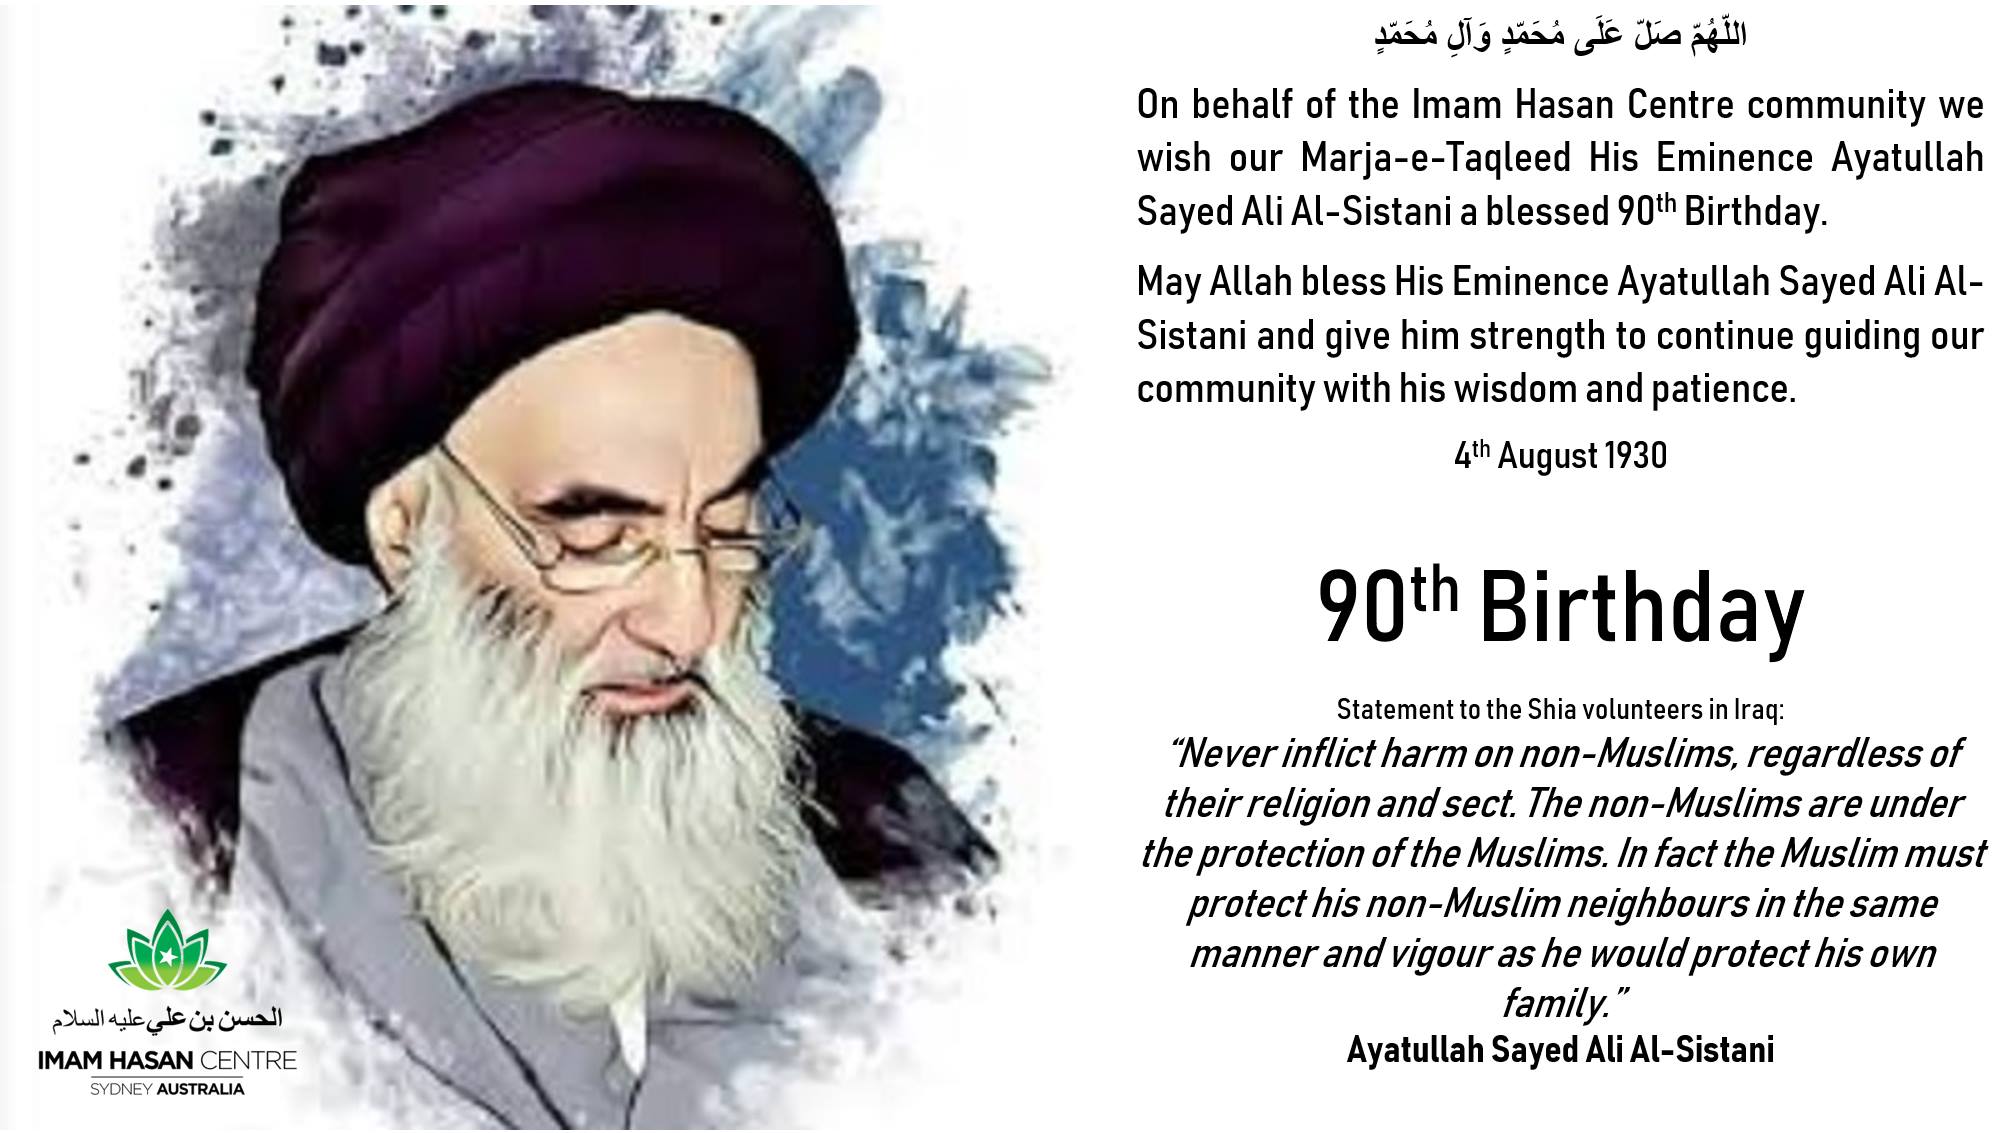 4th August 2020 – Wishing a blessed 90th birthday to His Eminence Ayatullah Sistani